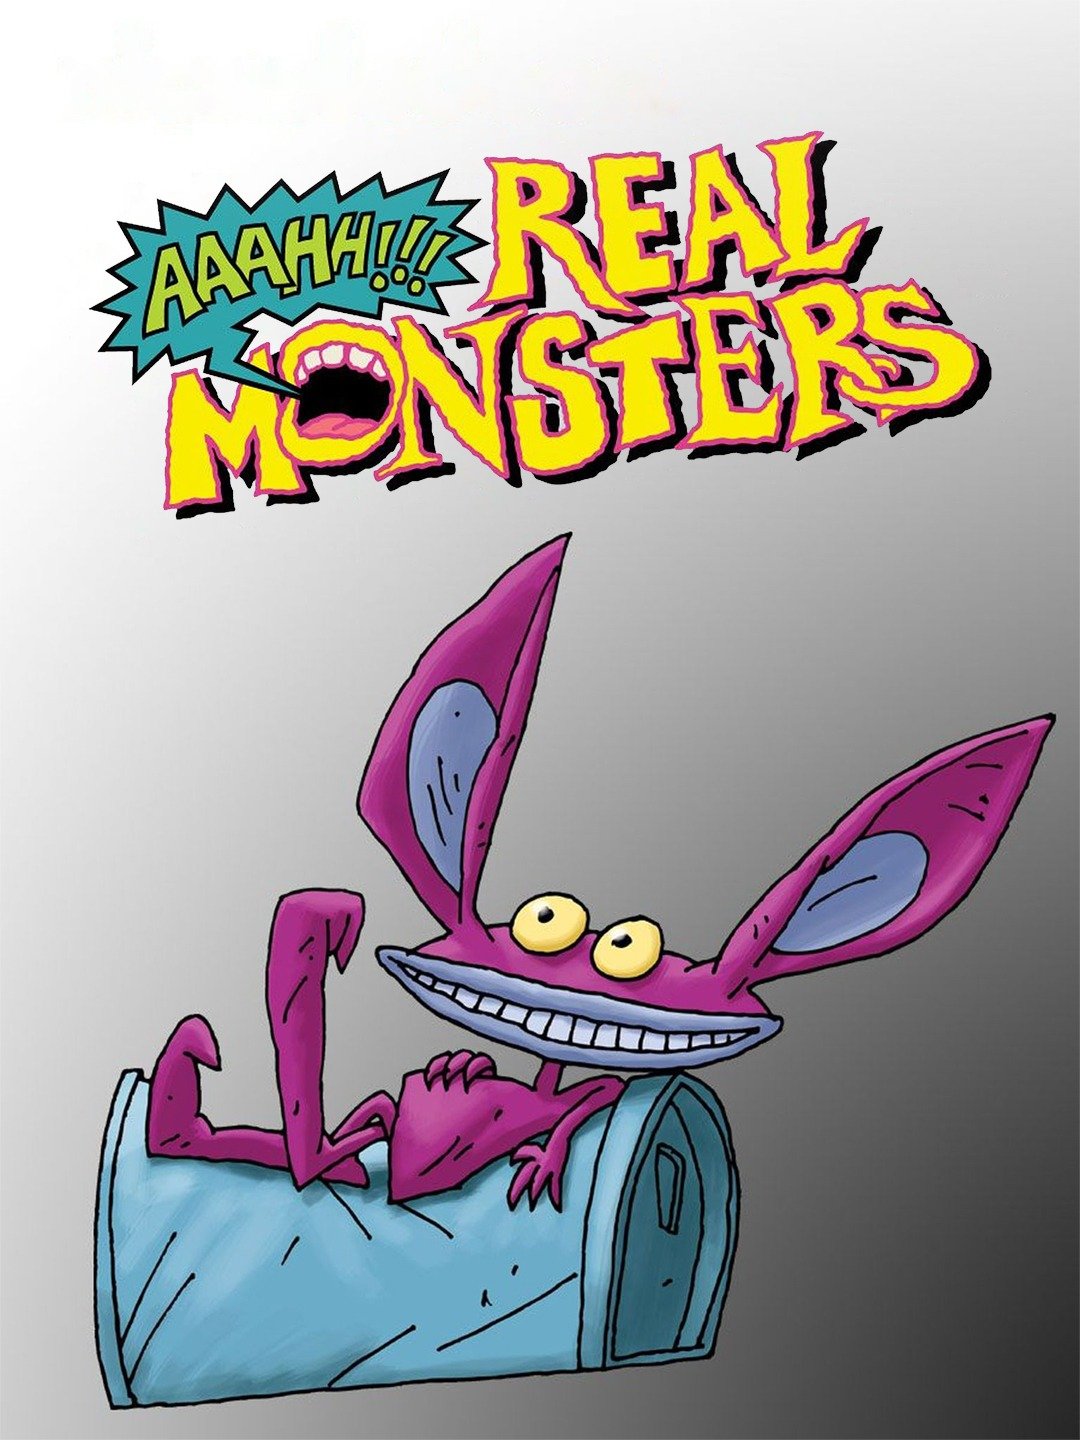 Aaahh!!! Real Monsters - Rotten Tomatoes